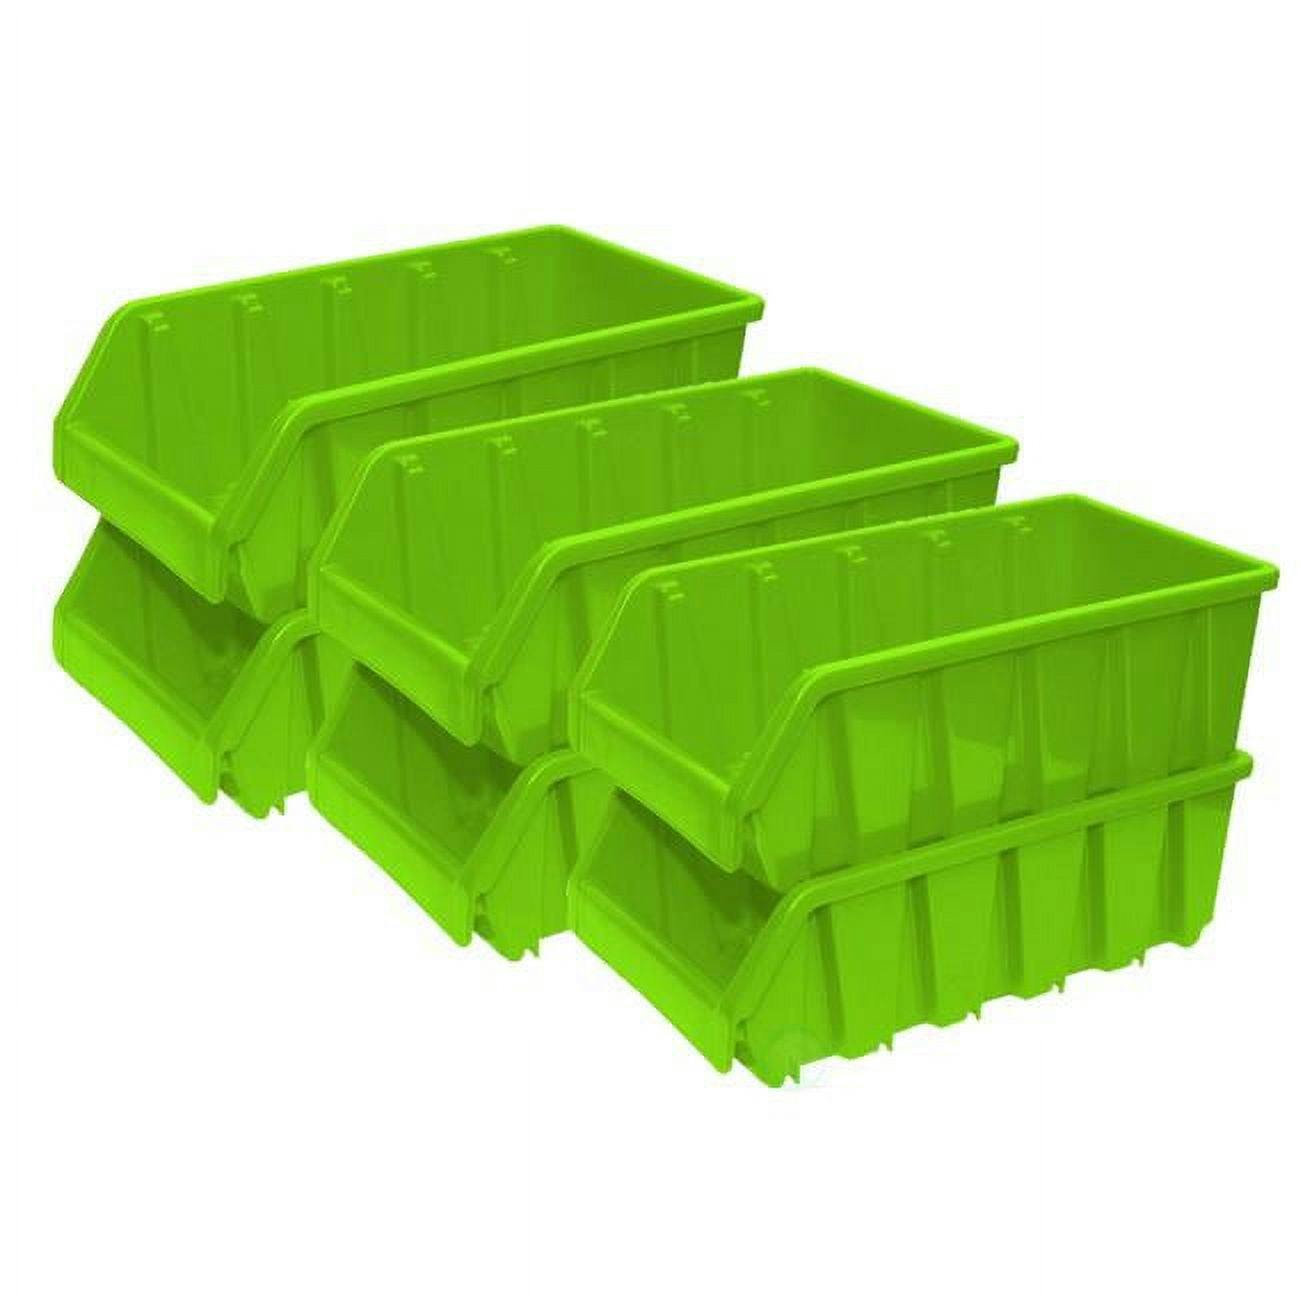 Set of 6 Green Collapsible Square Storage Bins